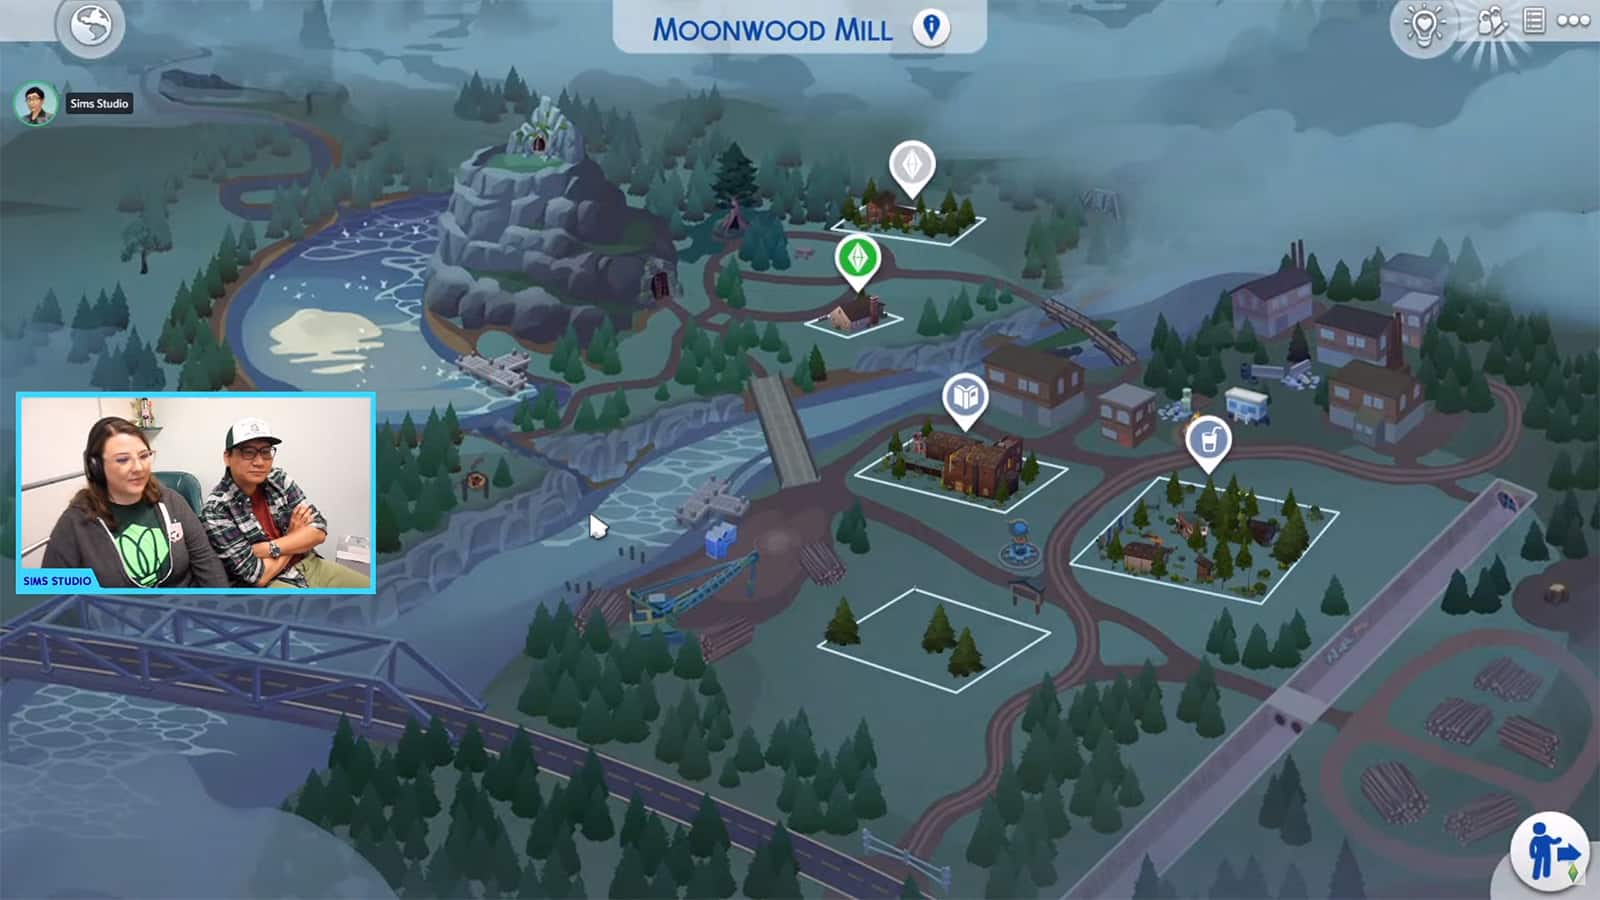 An image of the Moonwood Mill map in The Sims 4 Werewolves